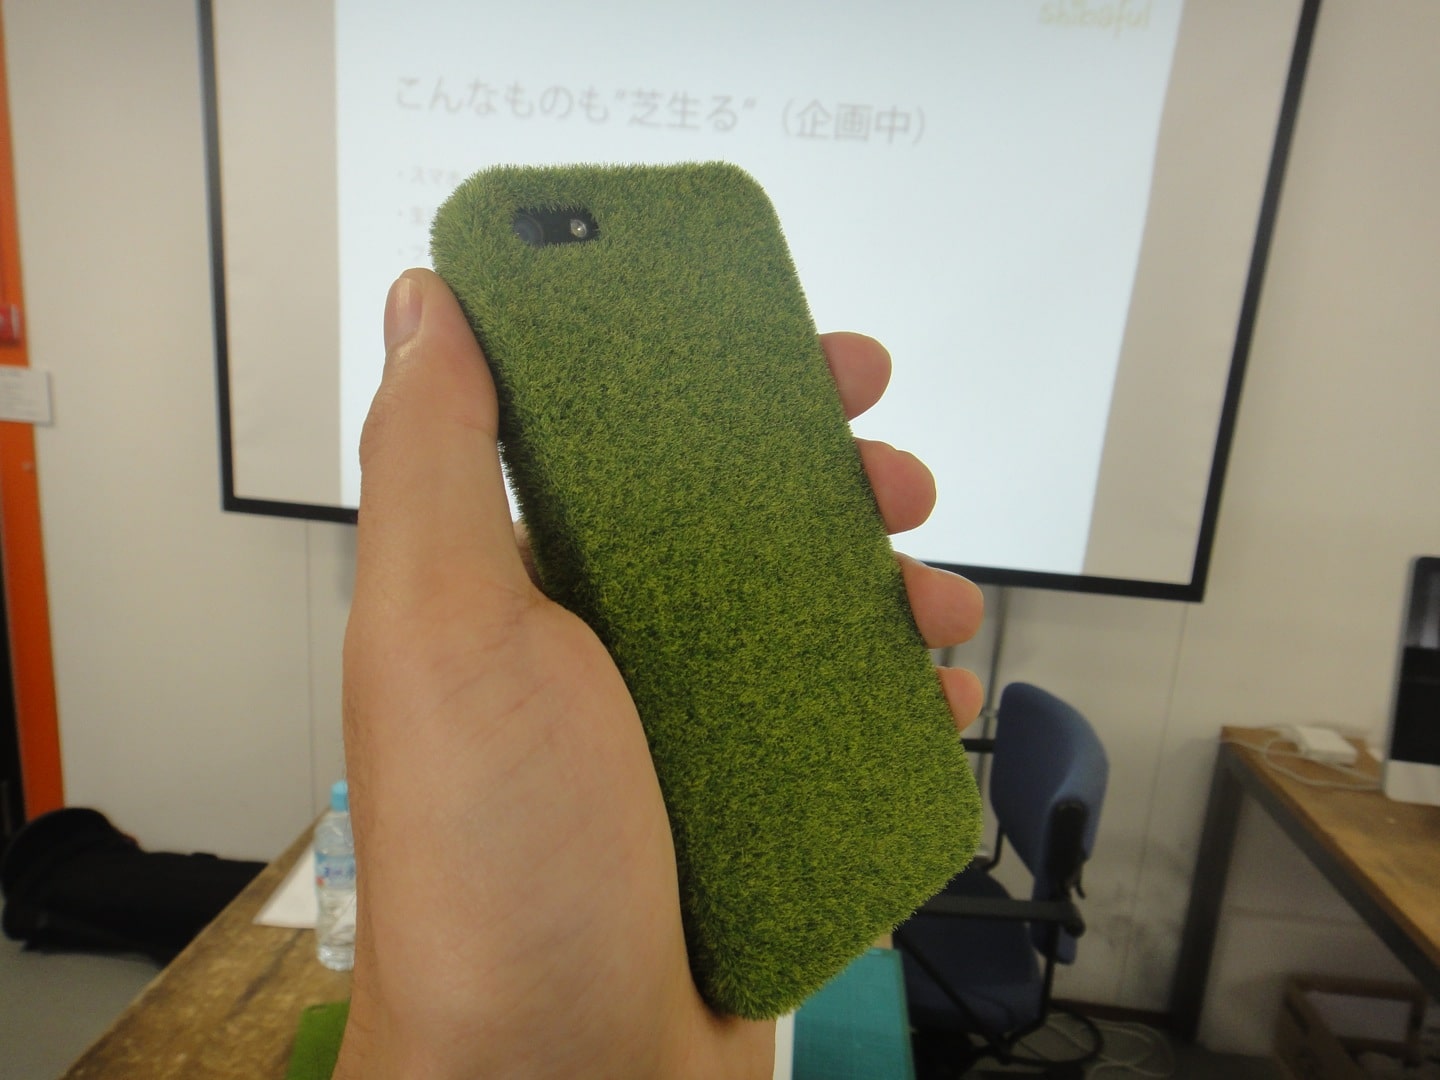 Unique iPhone Case Puts A Lush Lawn In Your Hands